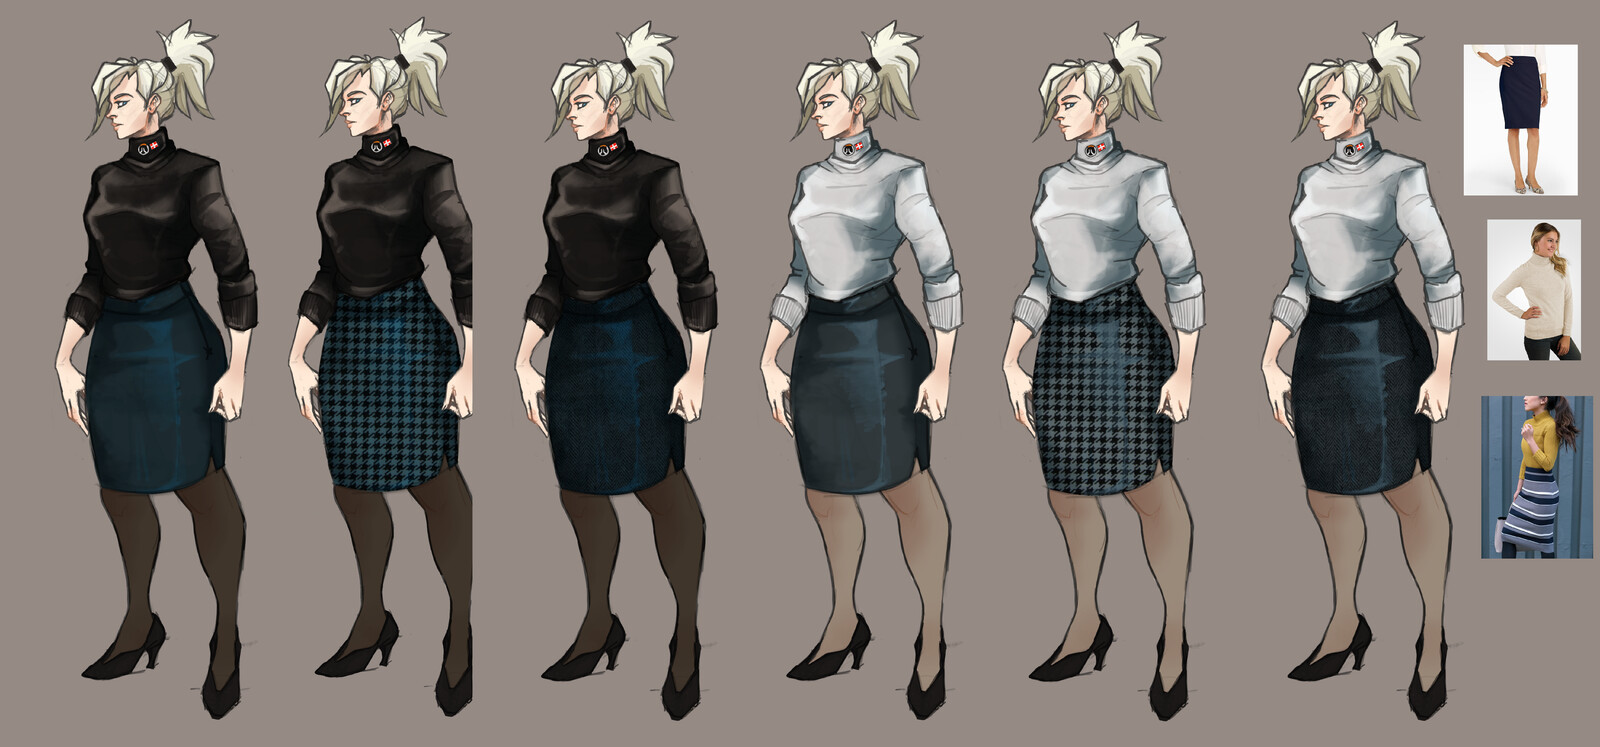 Ideations with research. I played with different textures, such as herringbone and houndstooth in her skirt.